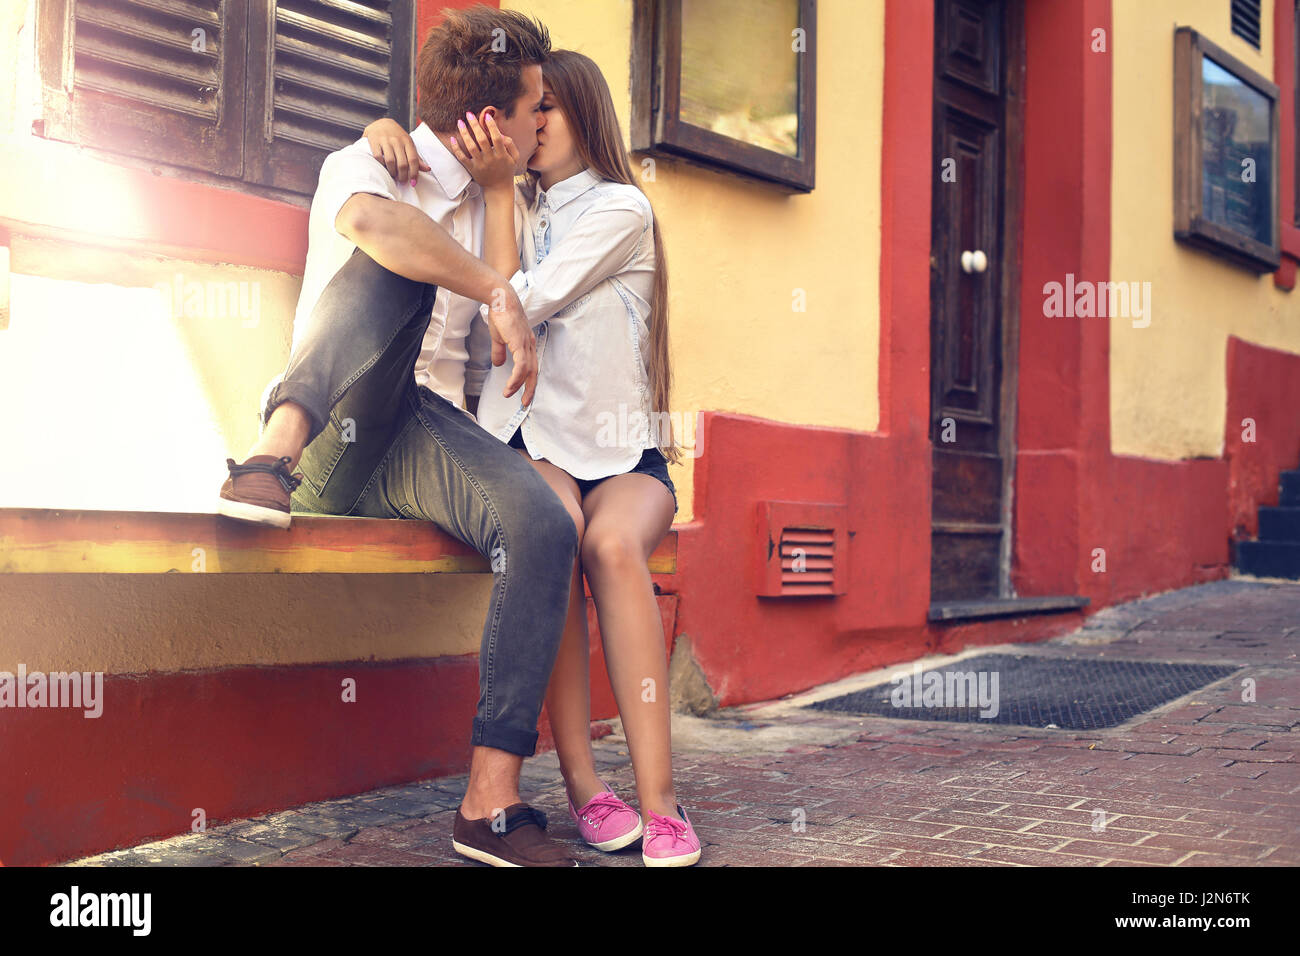 Young couple kissing outside Stock Photo